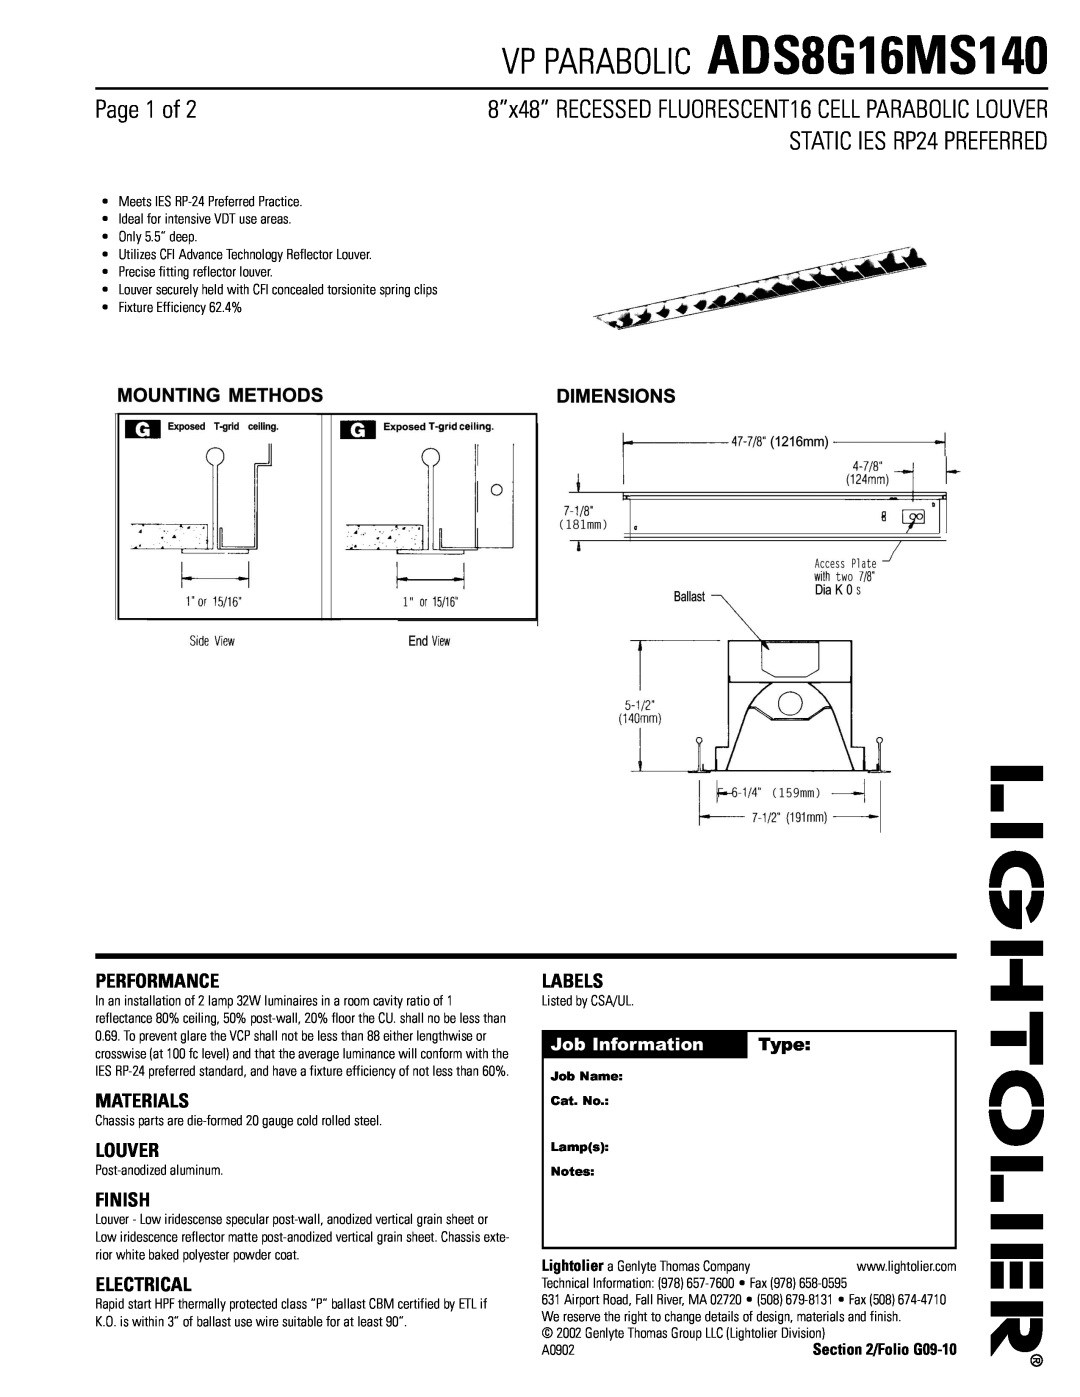 Lightolier manual VP PARABOLIC ADS8G16MS140, Page 1 of, STATIC IES RP24 PREFERRED, Performance, Materials, Louver, Type 